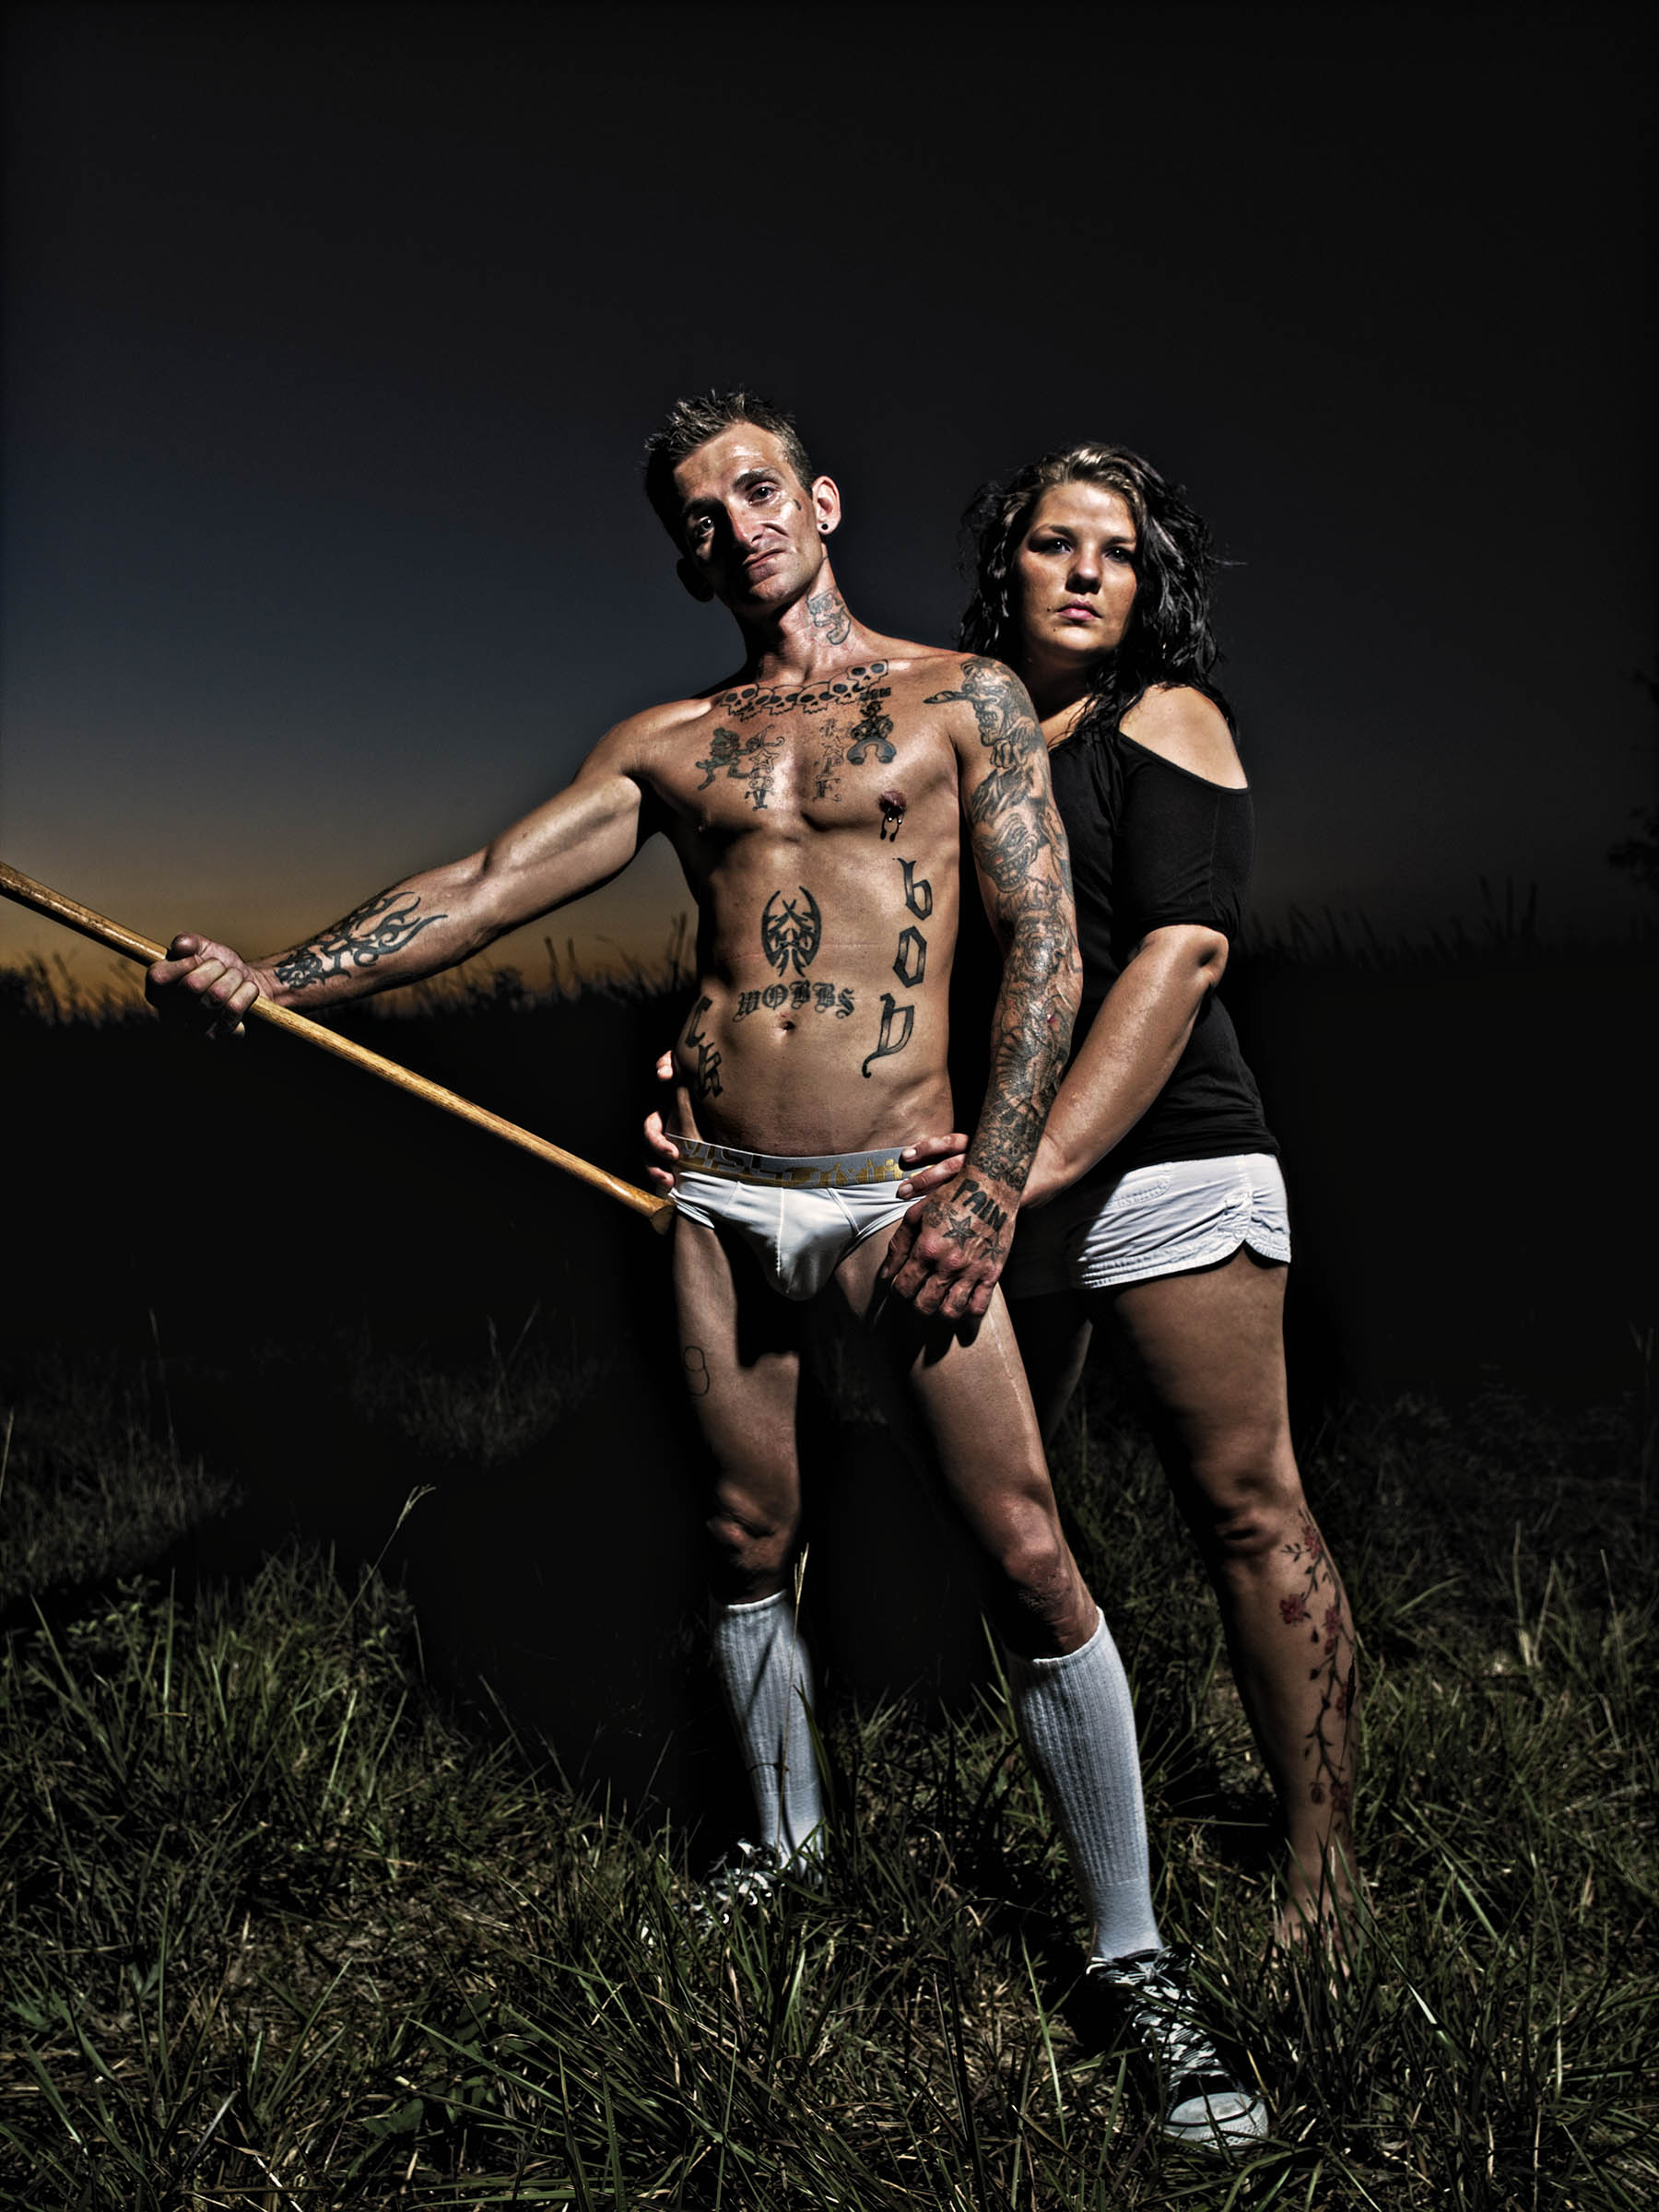 Billy Ianne, Tattoo artist, Kimber, aka The Axe Twins, Keepers of the EverGlades, Conceptual Portrait Photography by the best editorial location Professional Advertising Portrait Photographer in NYC and LA,  Berlin, Munich, Paris, London Wick Beavers Portraiture Photography